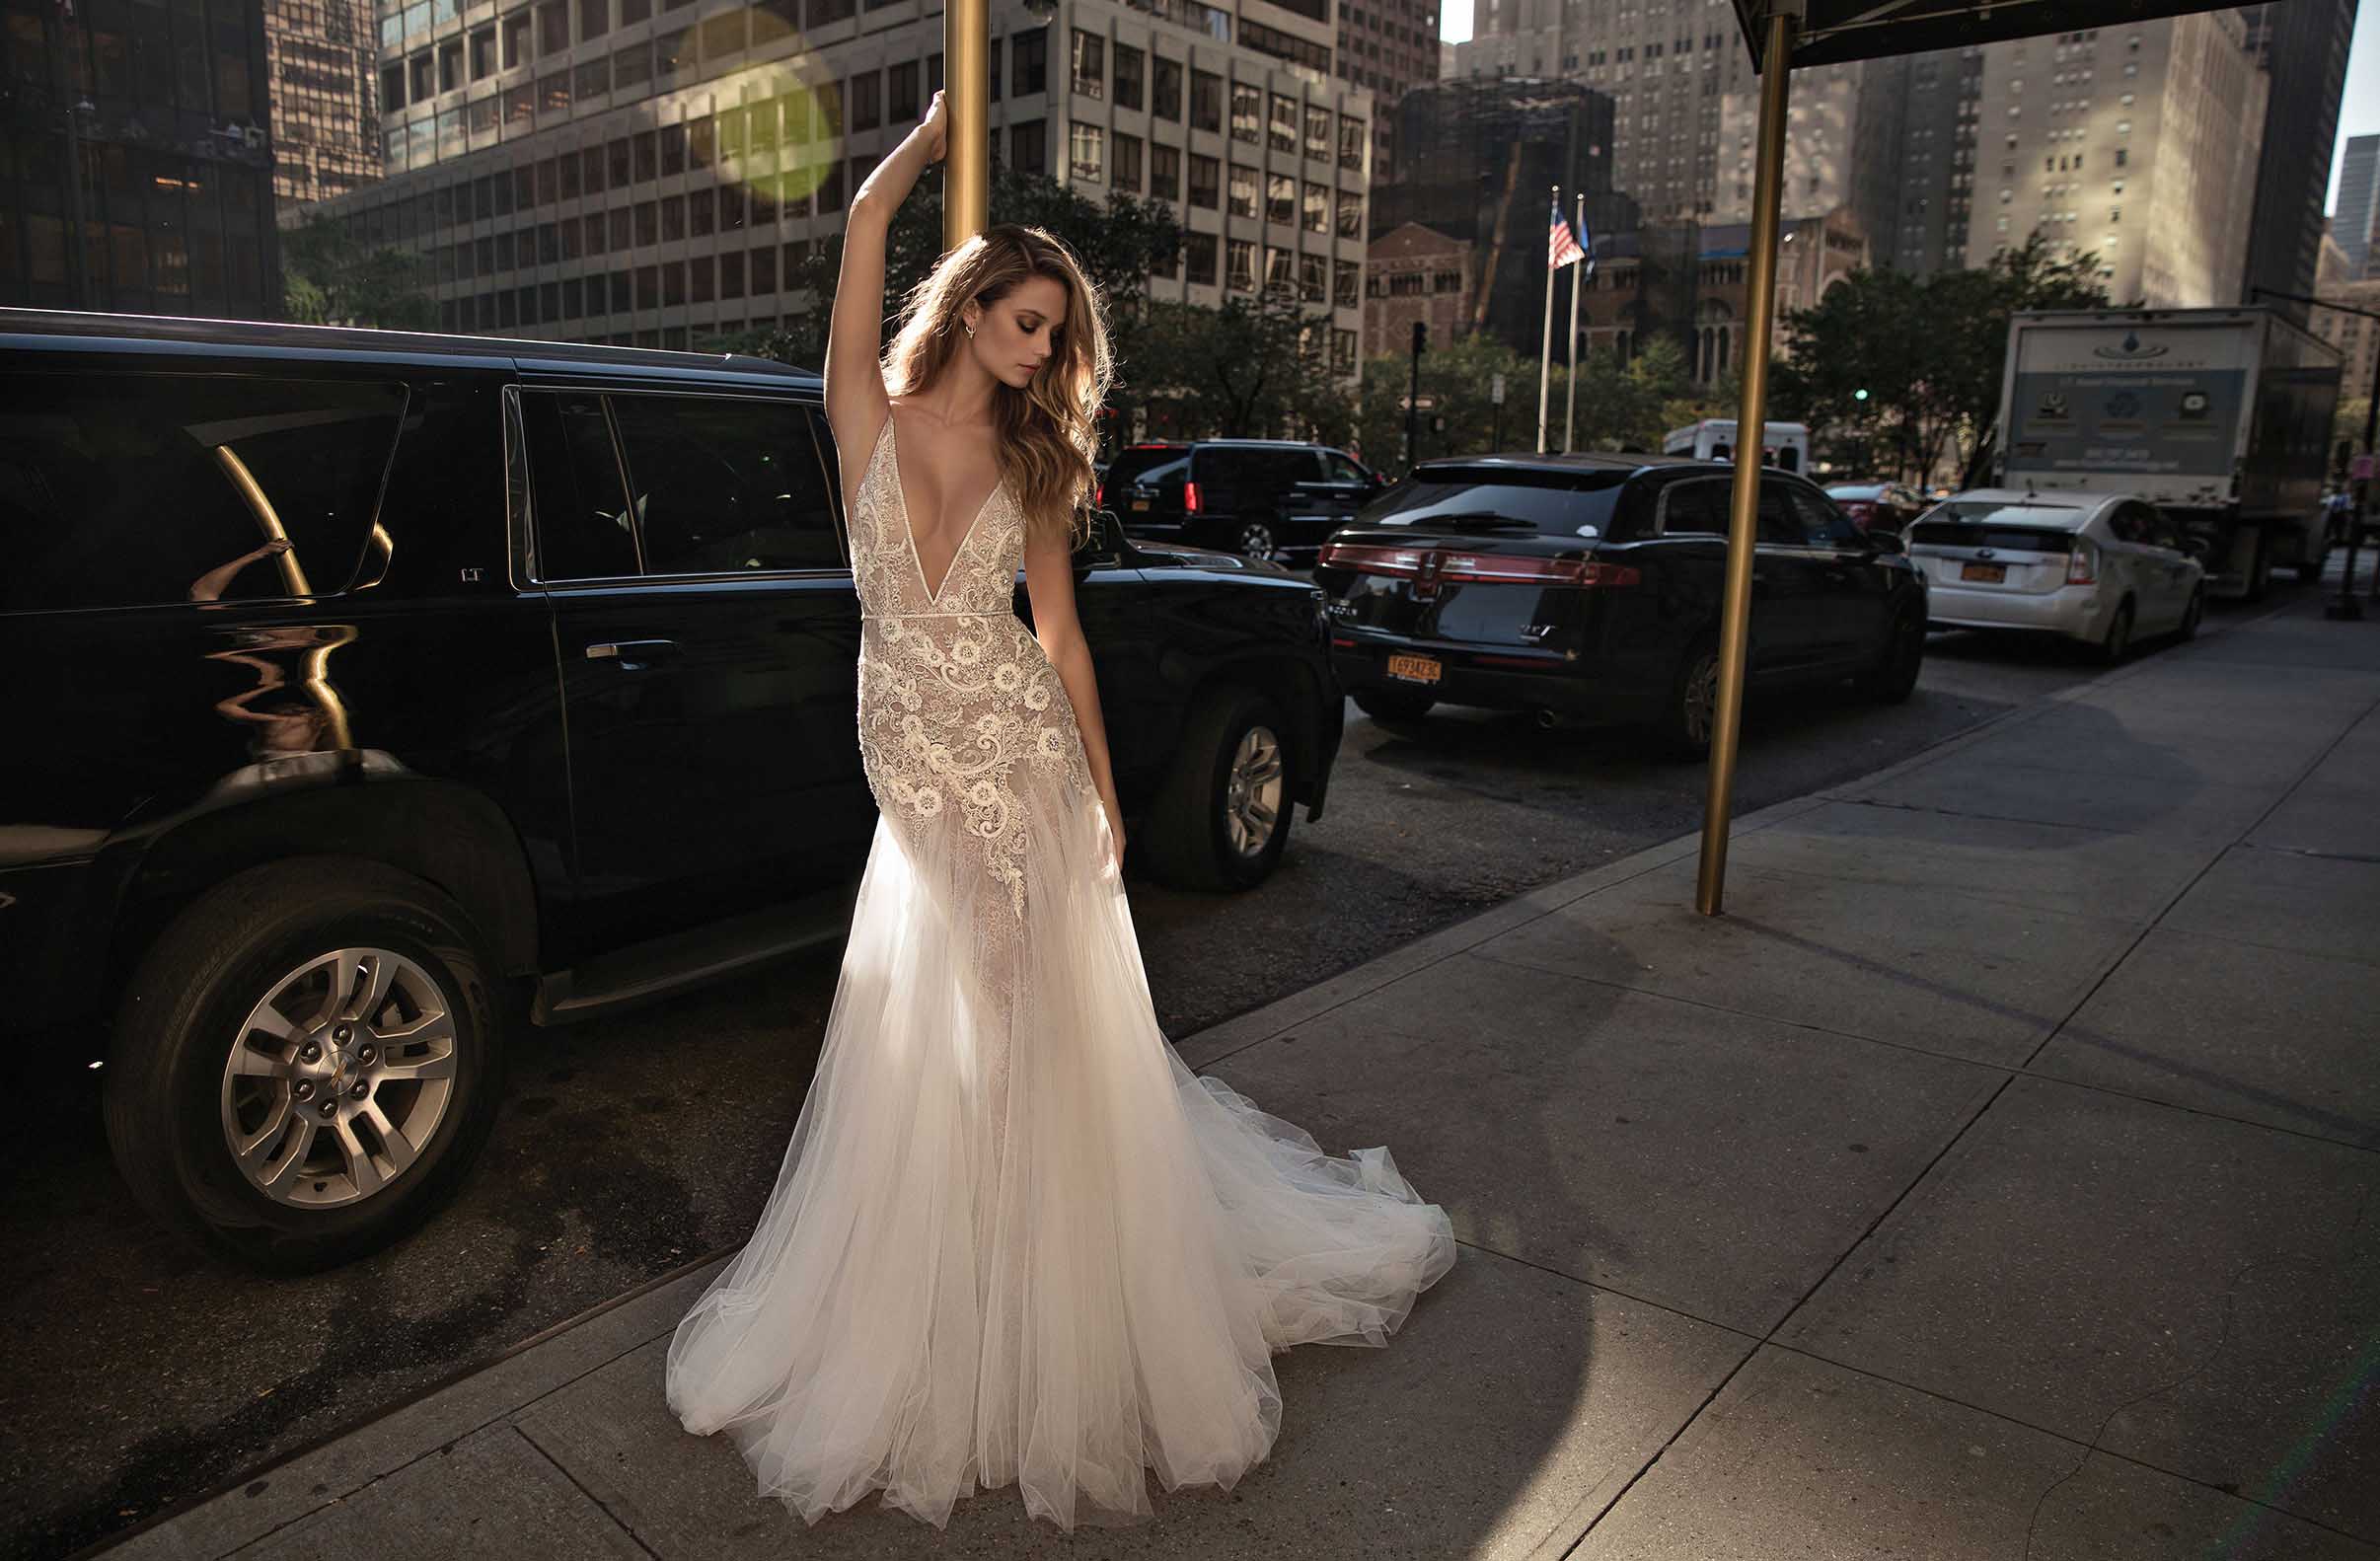 A plunging neckline wedding dress with lace appliques and a light mermaid silhouette, a tulle skirt